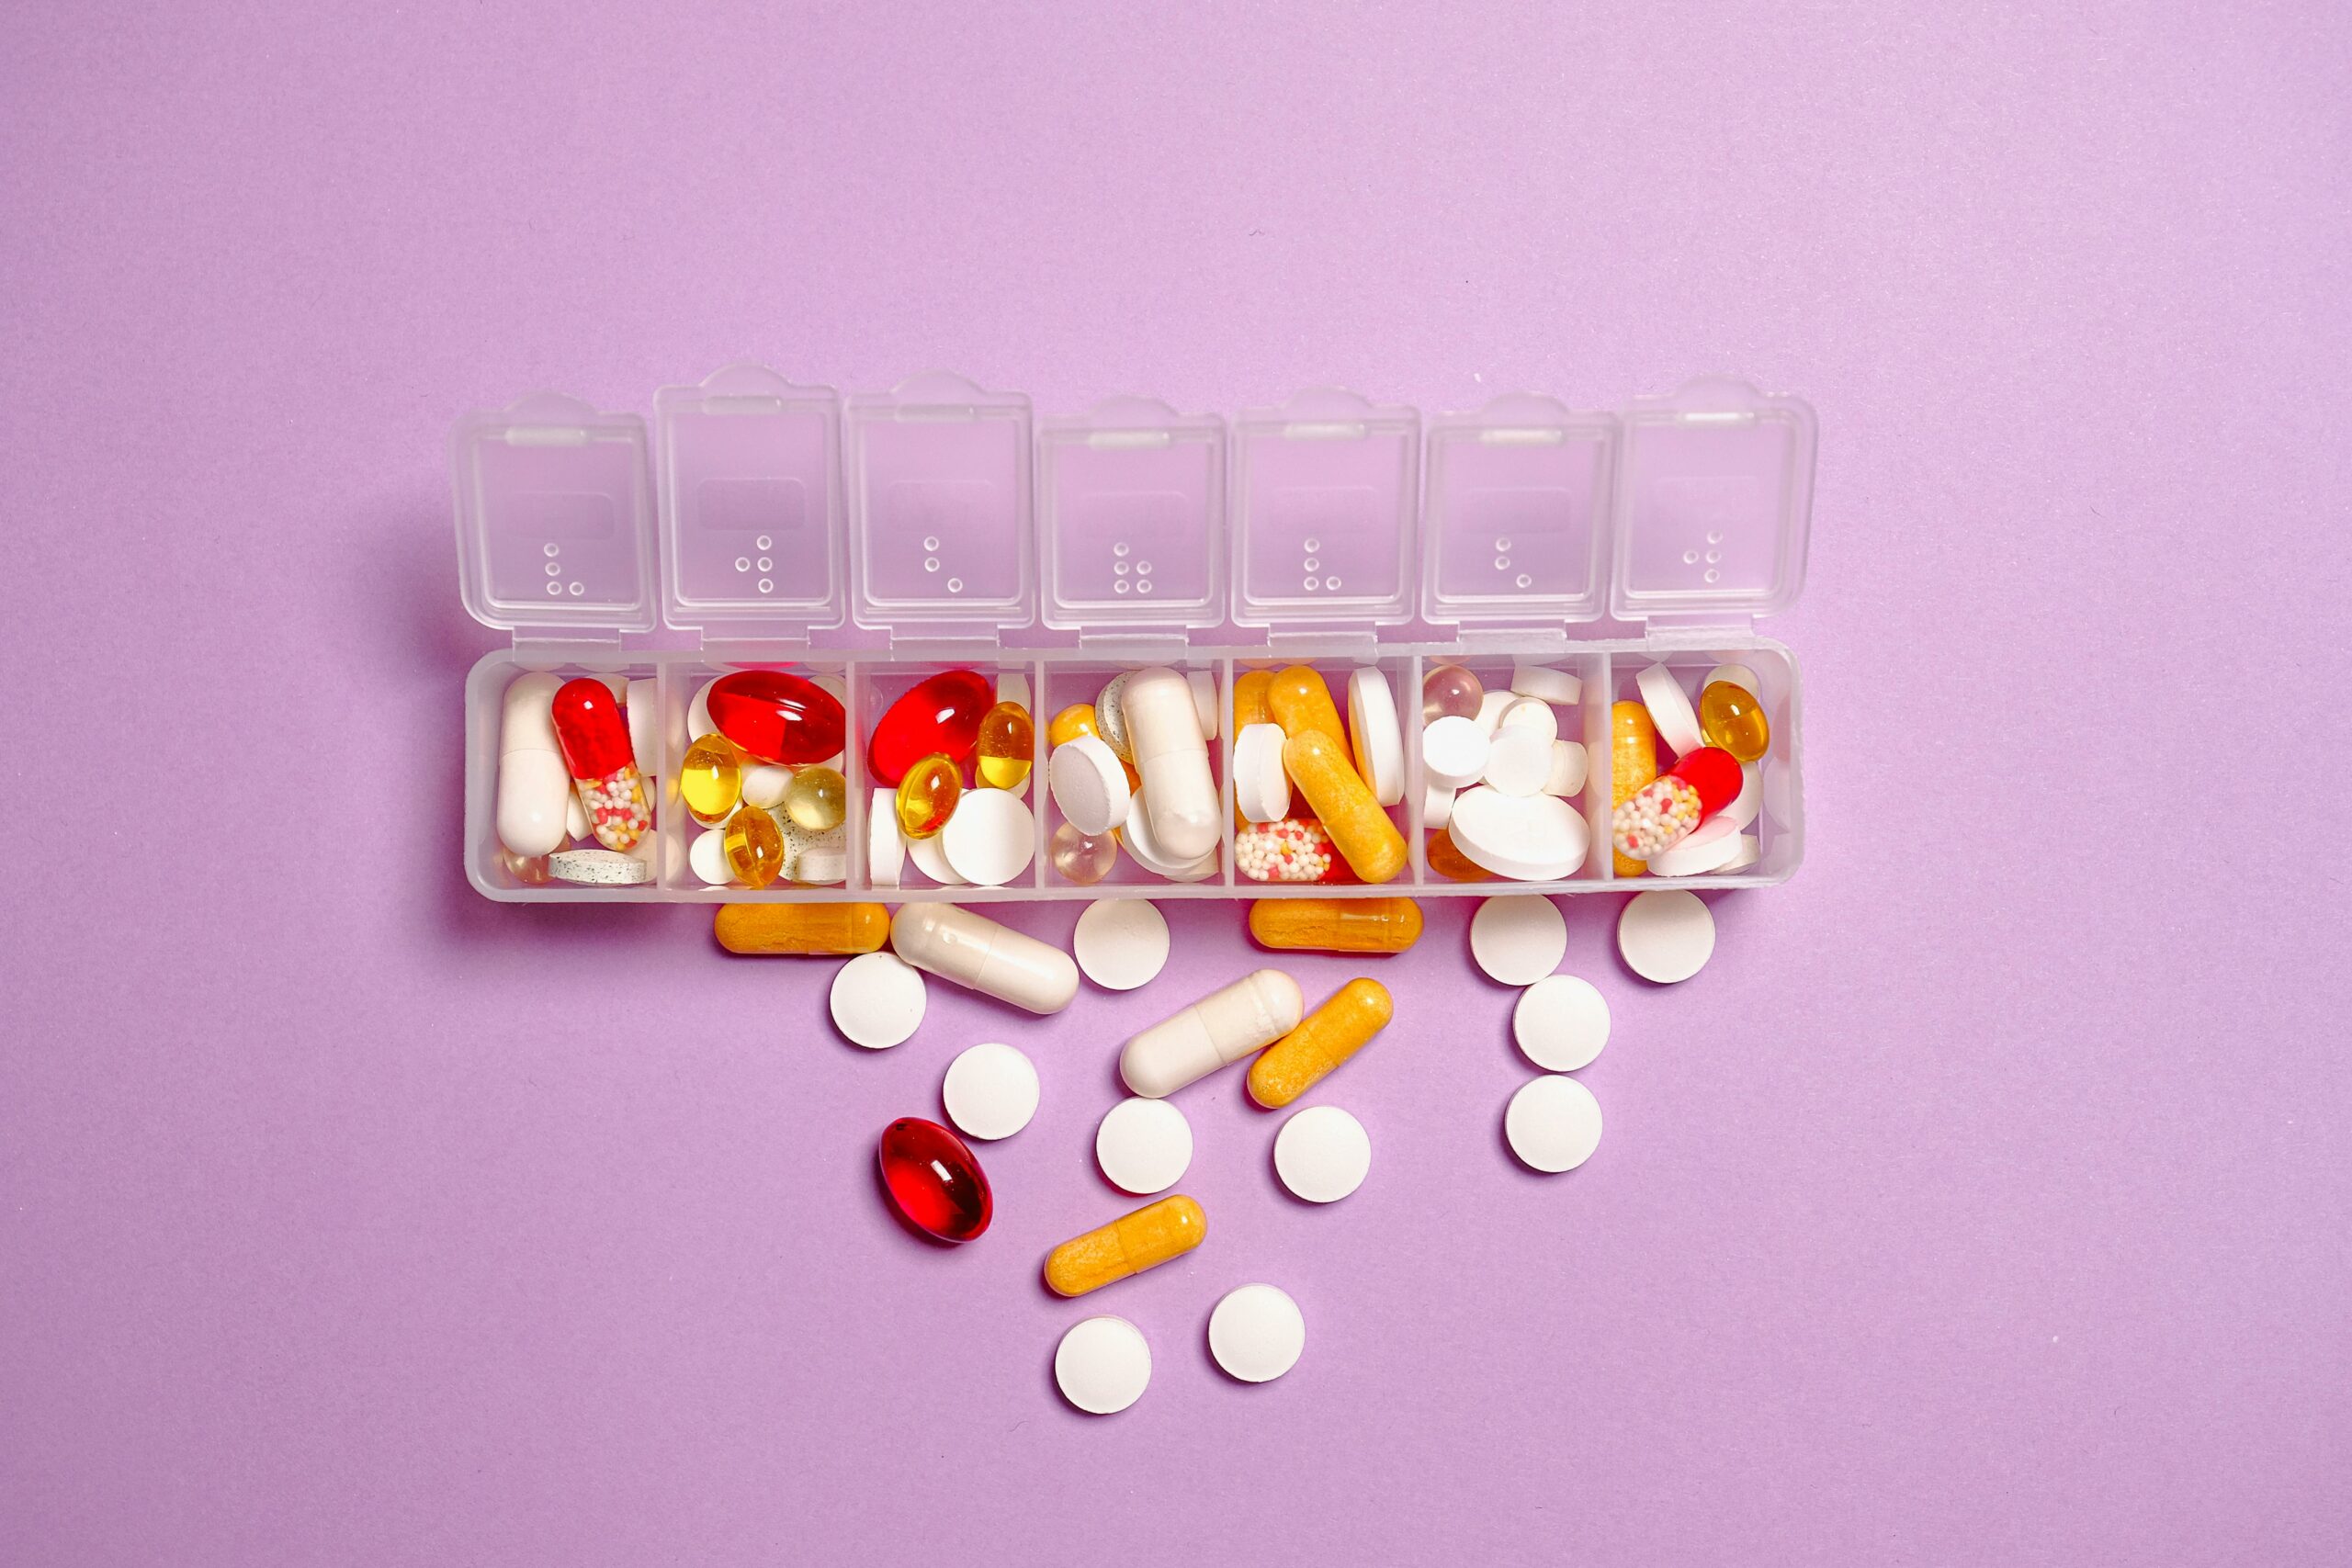 Health or gimmick: Are supplements worth your hard-earned money?